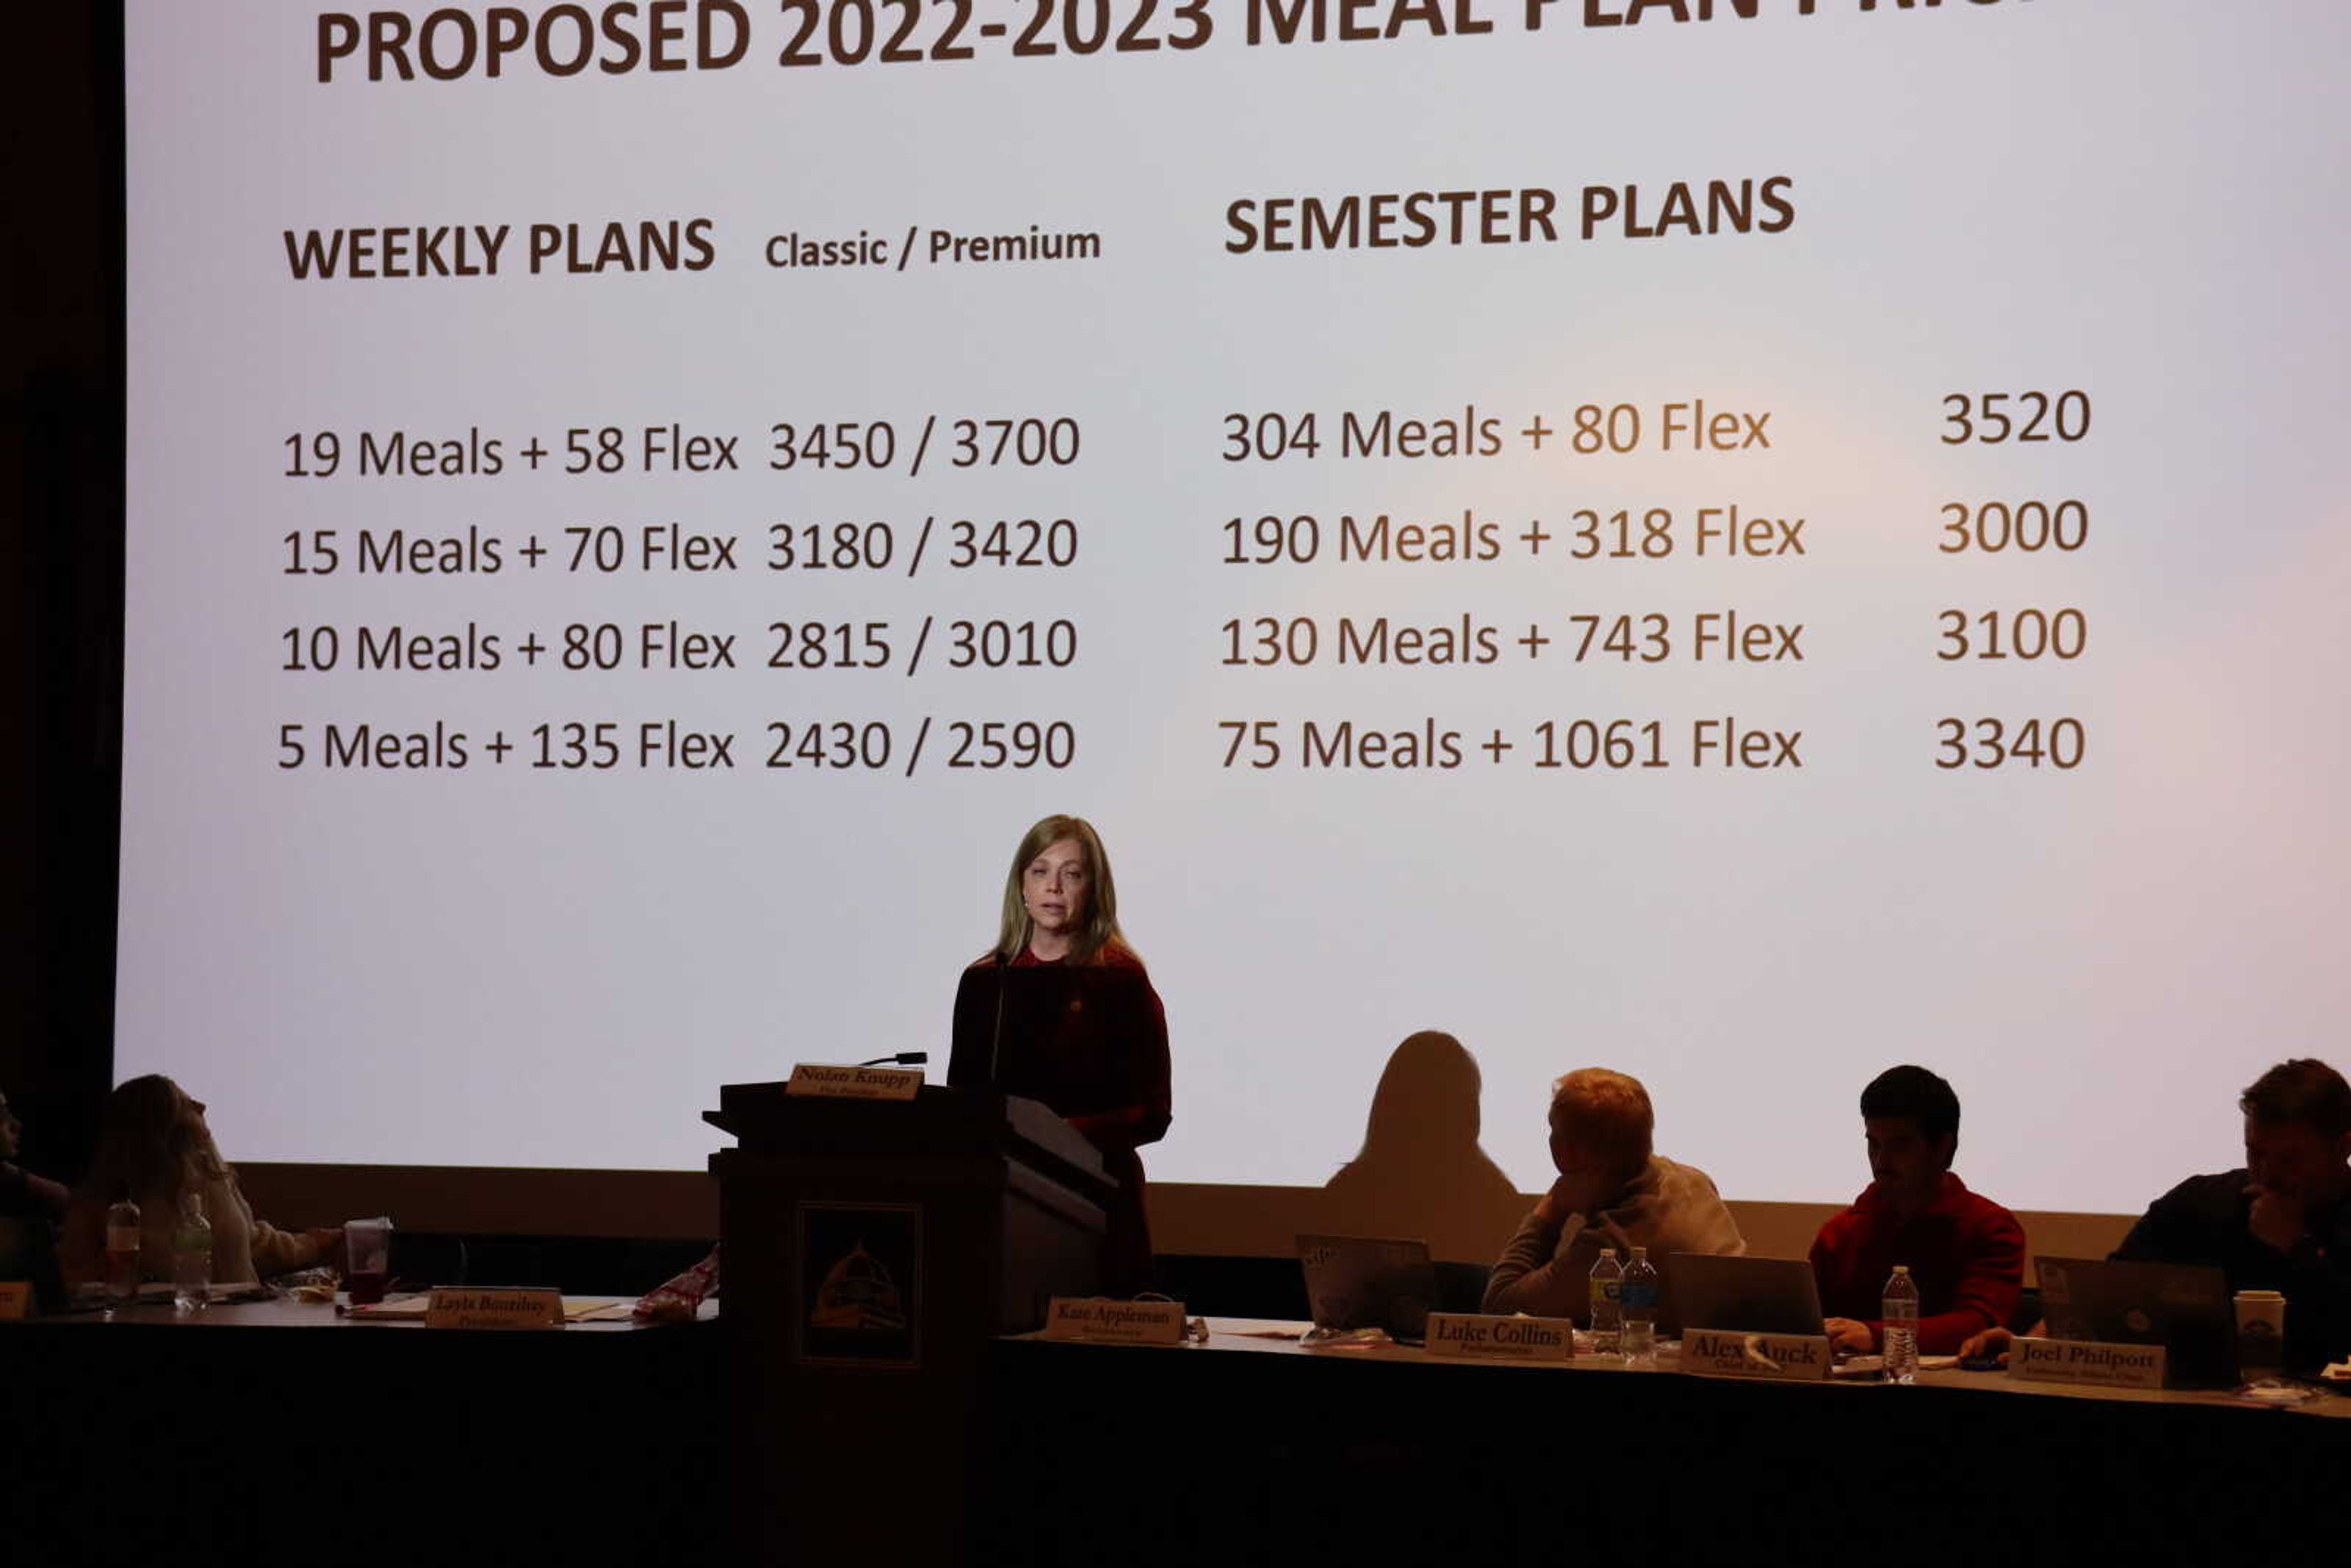 SGA follows up on new meal plan changes and hears club funding requests at Feb. 14 meeting